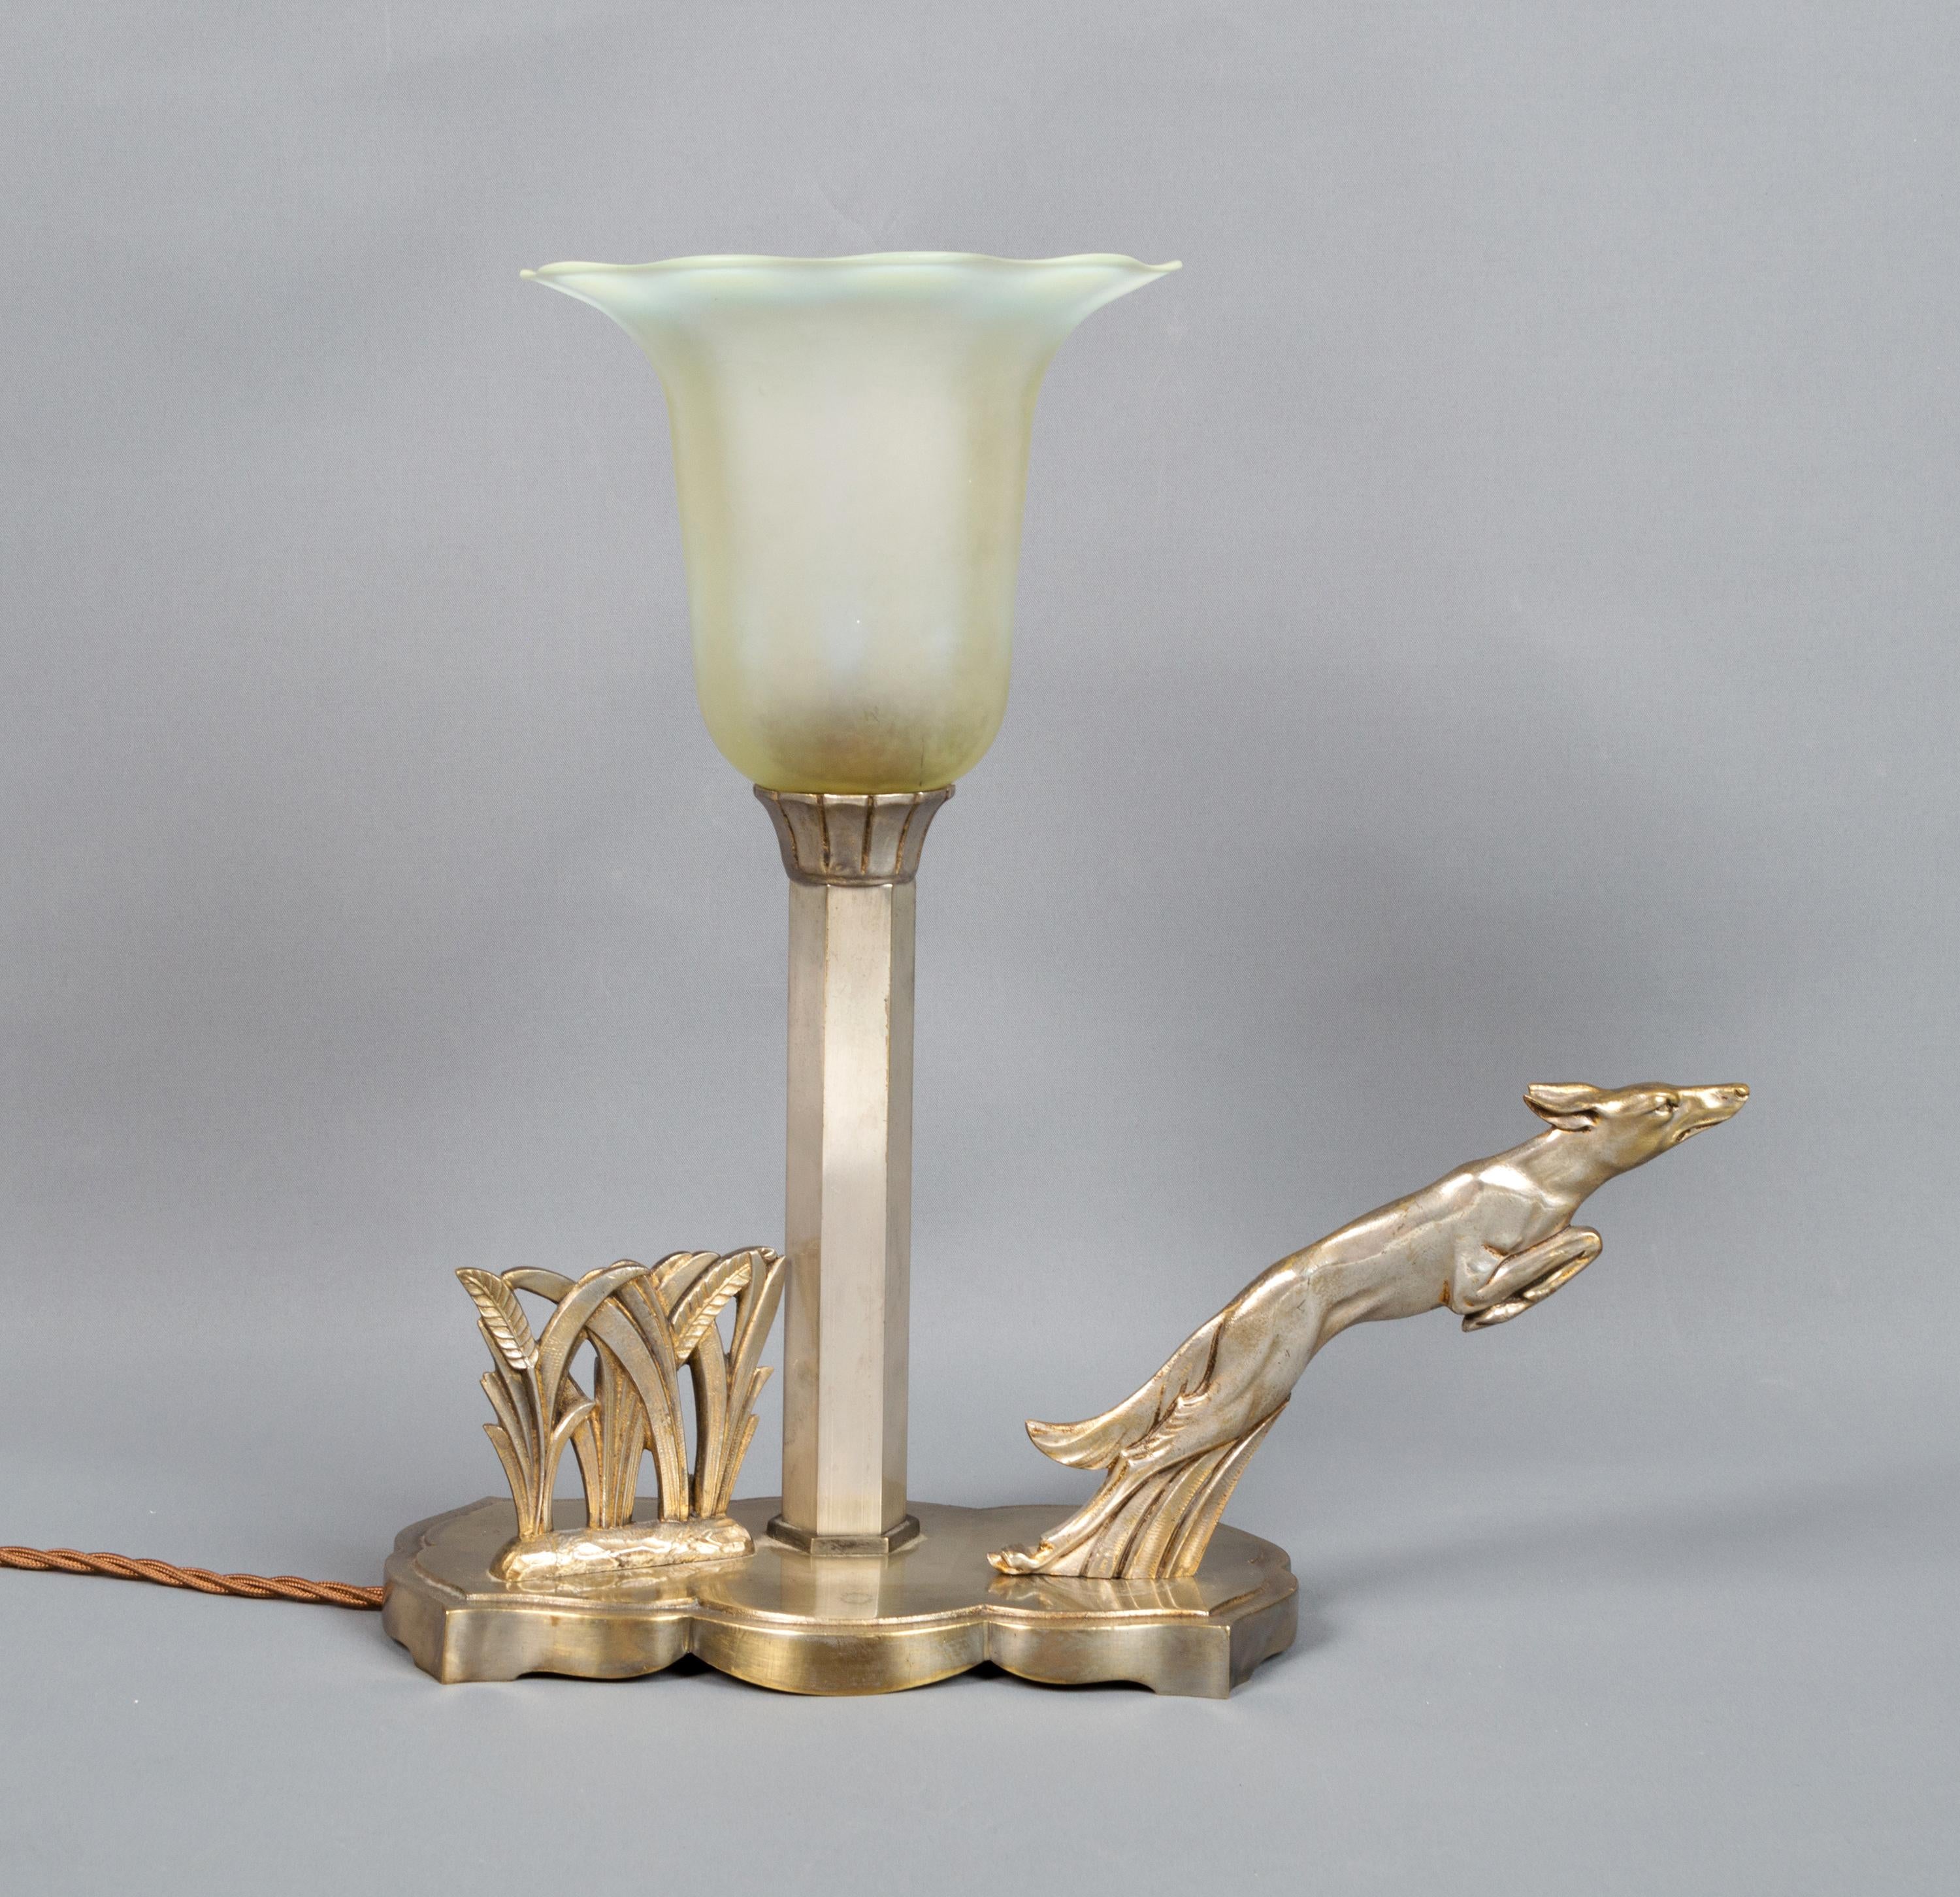 French Art Deco Chrome and Glass 'Leaping Hound' Table Lamp Desk Lamp C.1930 In Good Condition For Sale In London, GB